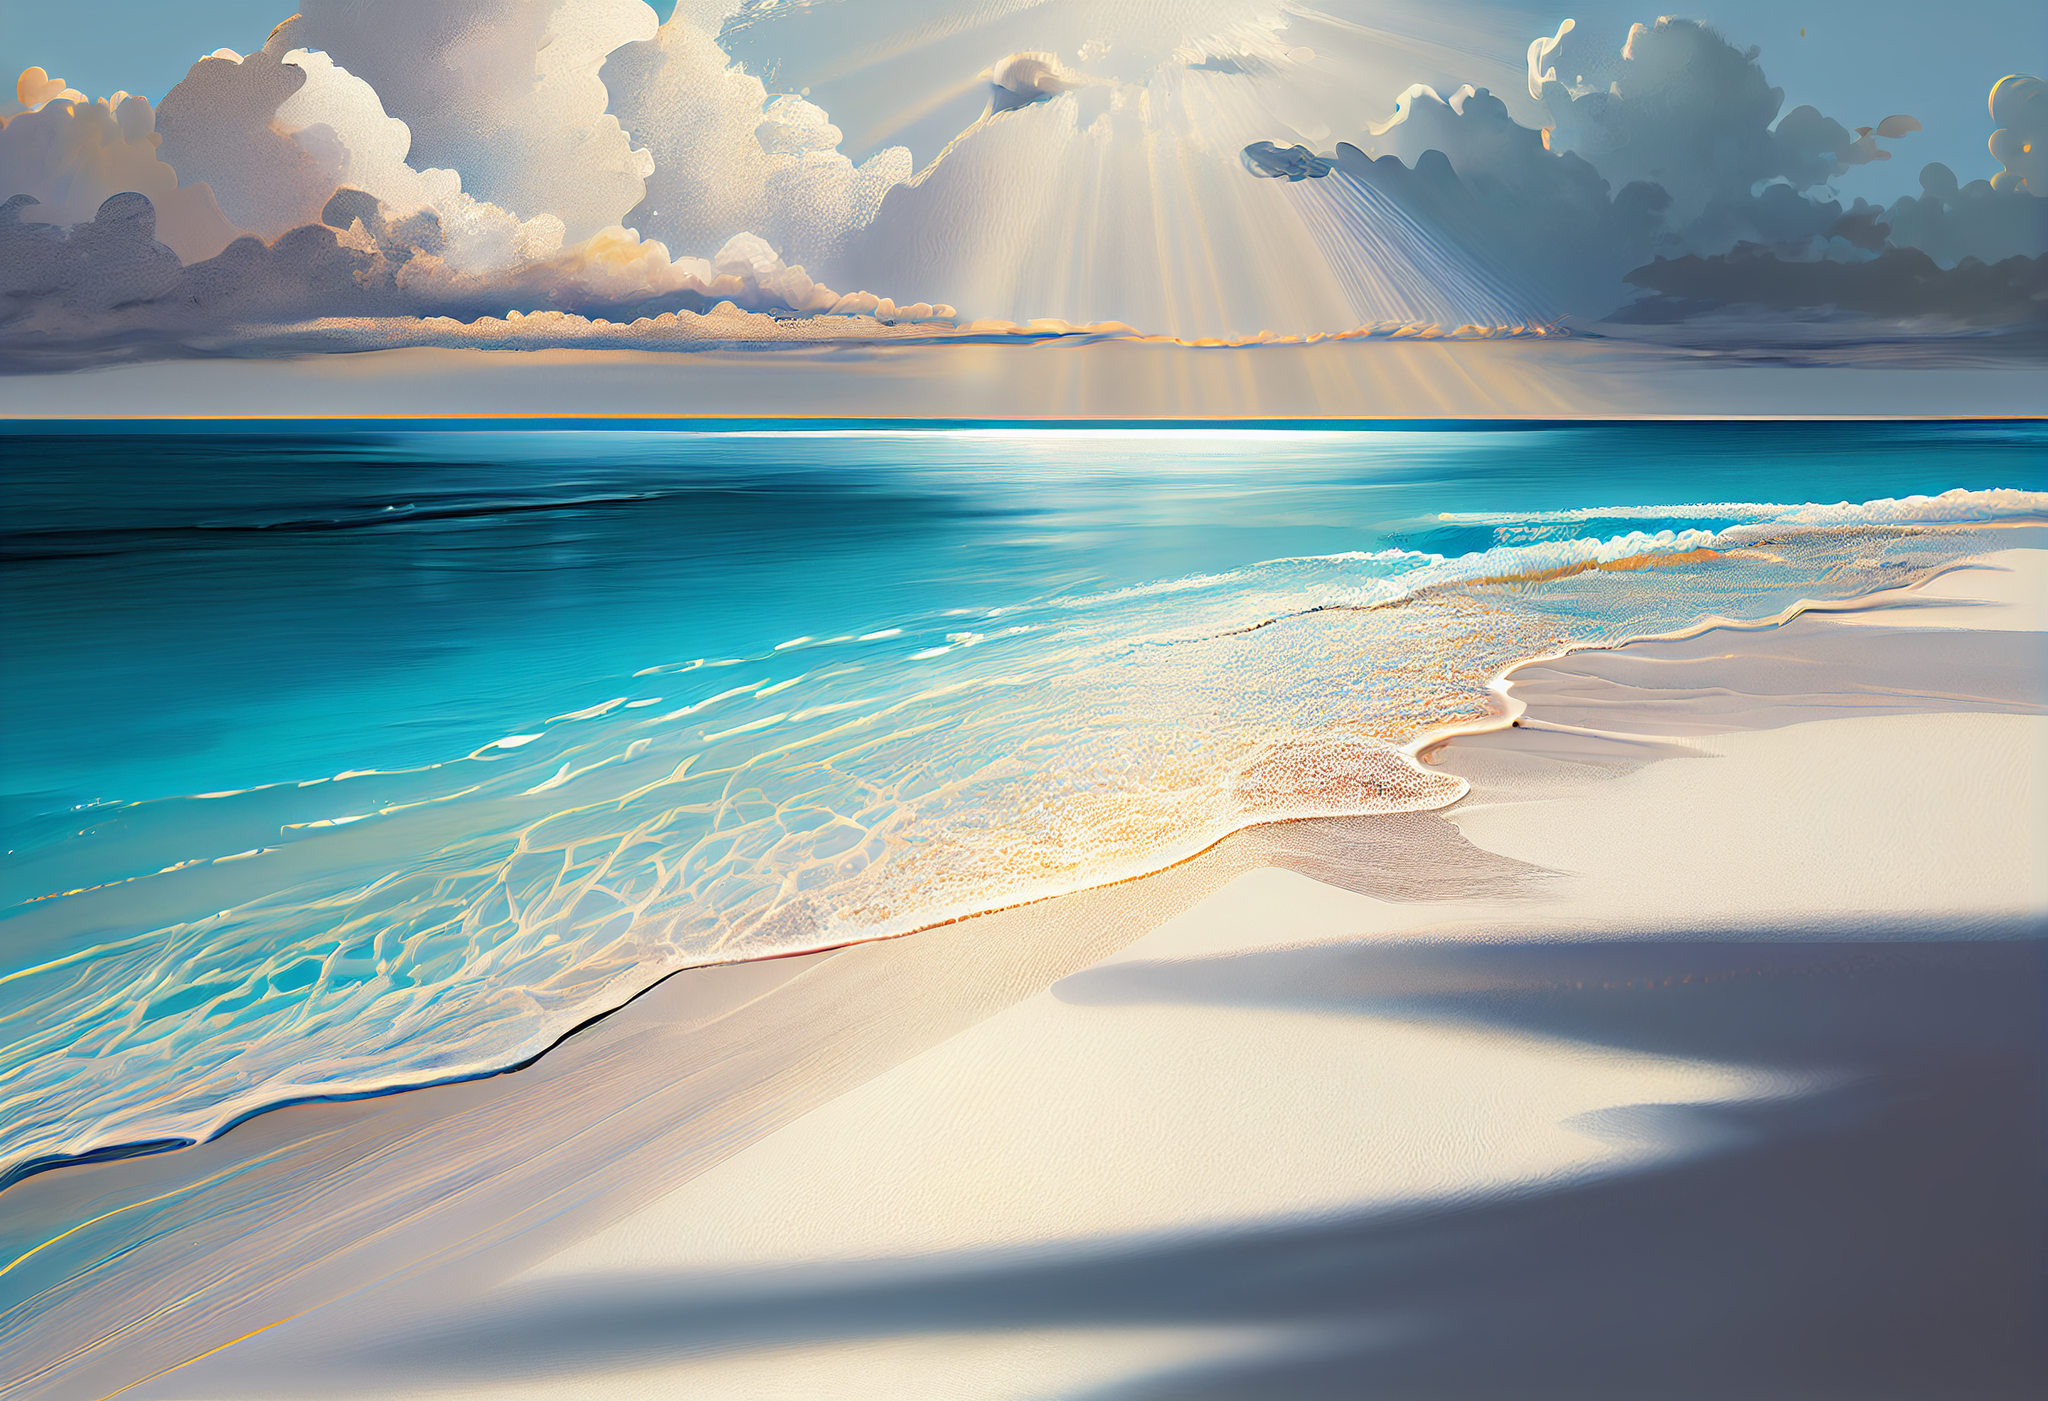 A Captivating Acrylic Color Print of a Tranquil Sea and White Sands Illuminated by Sunbeams